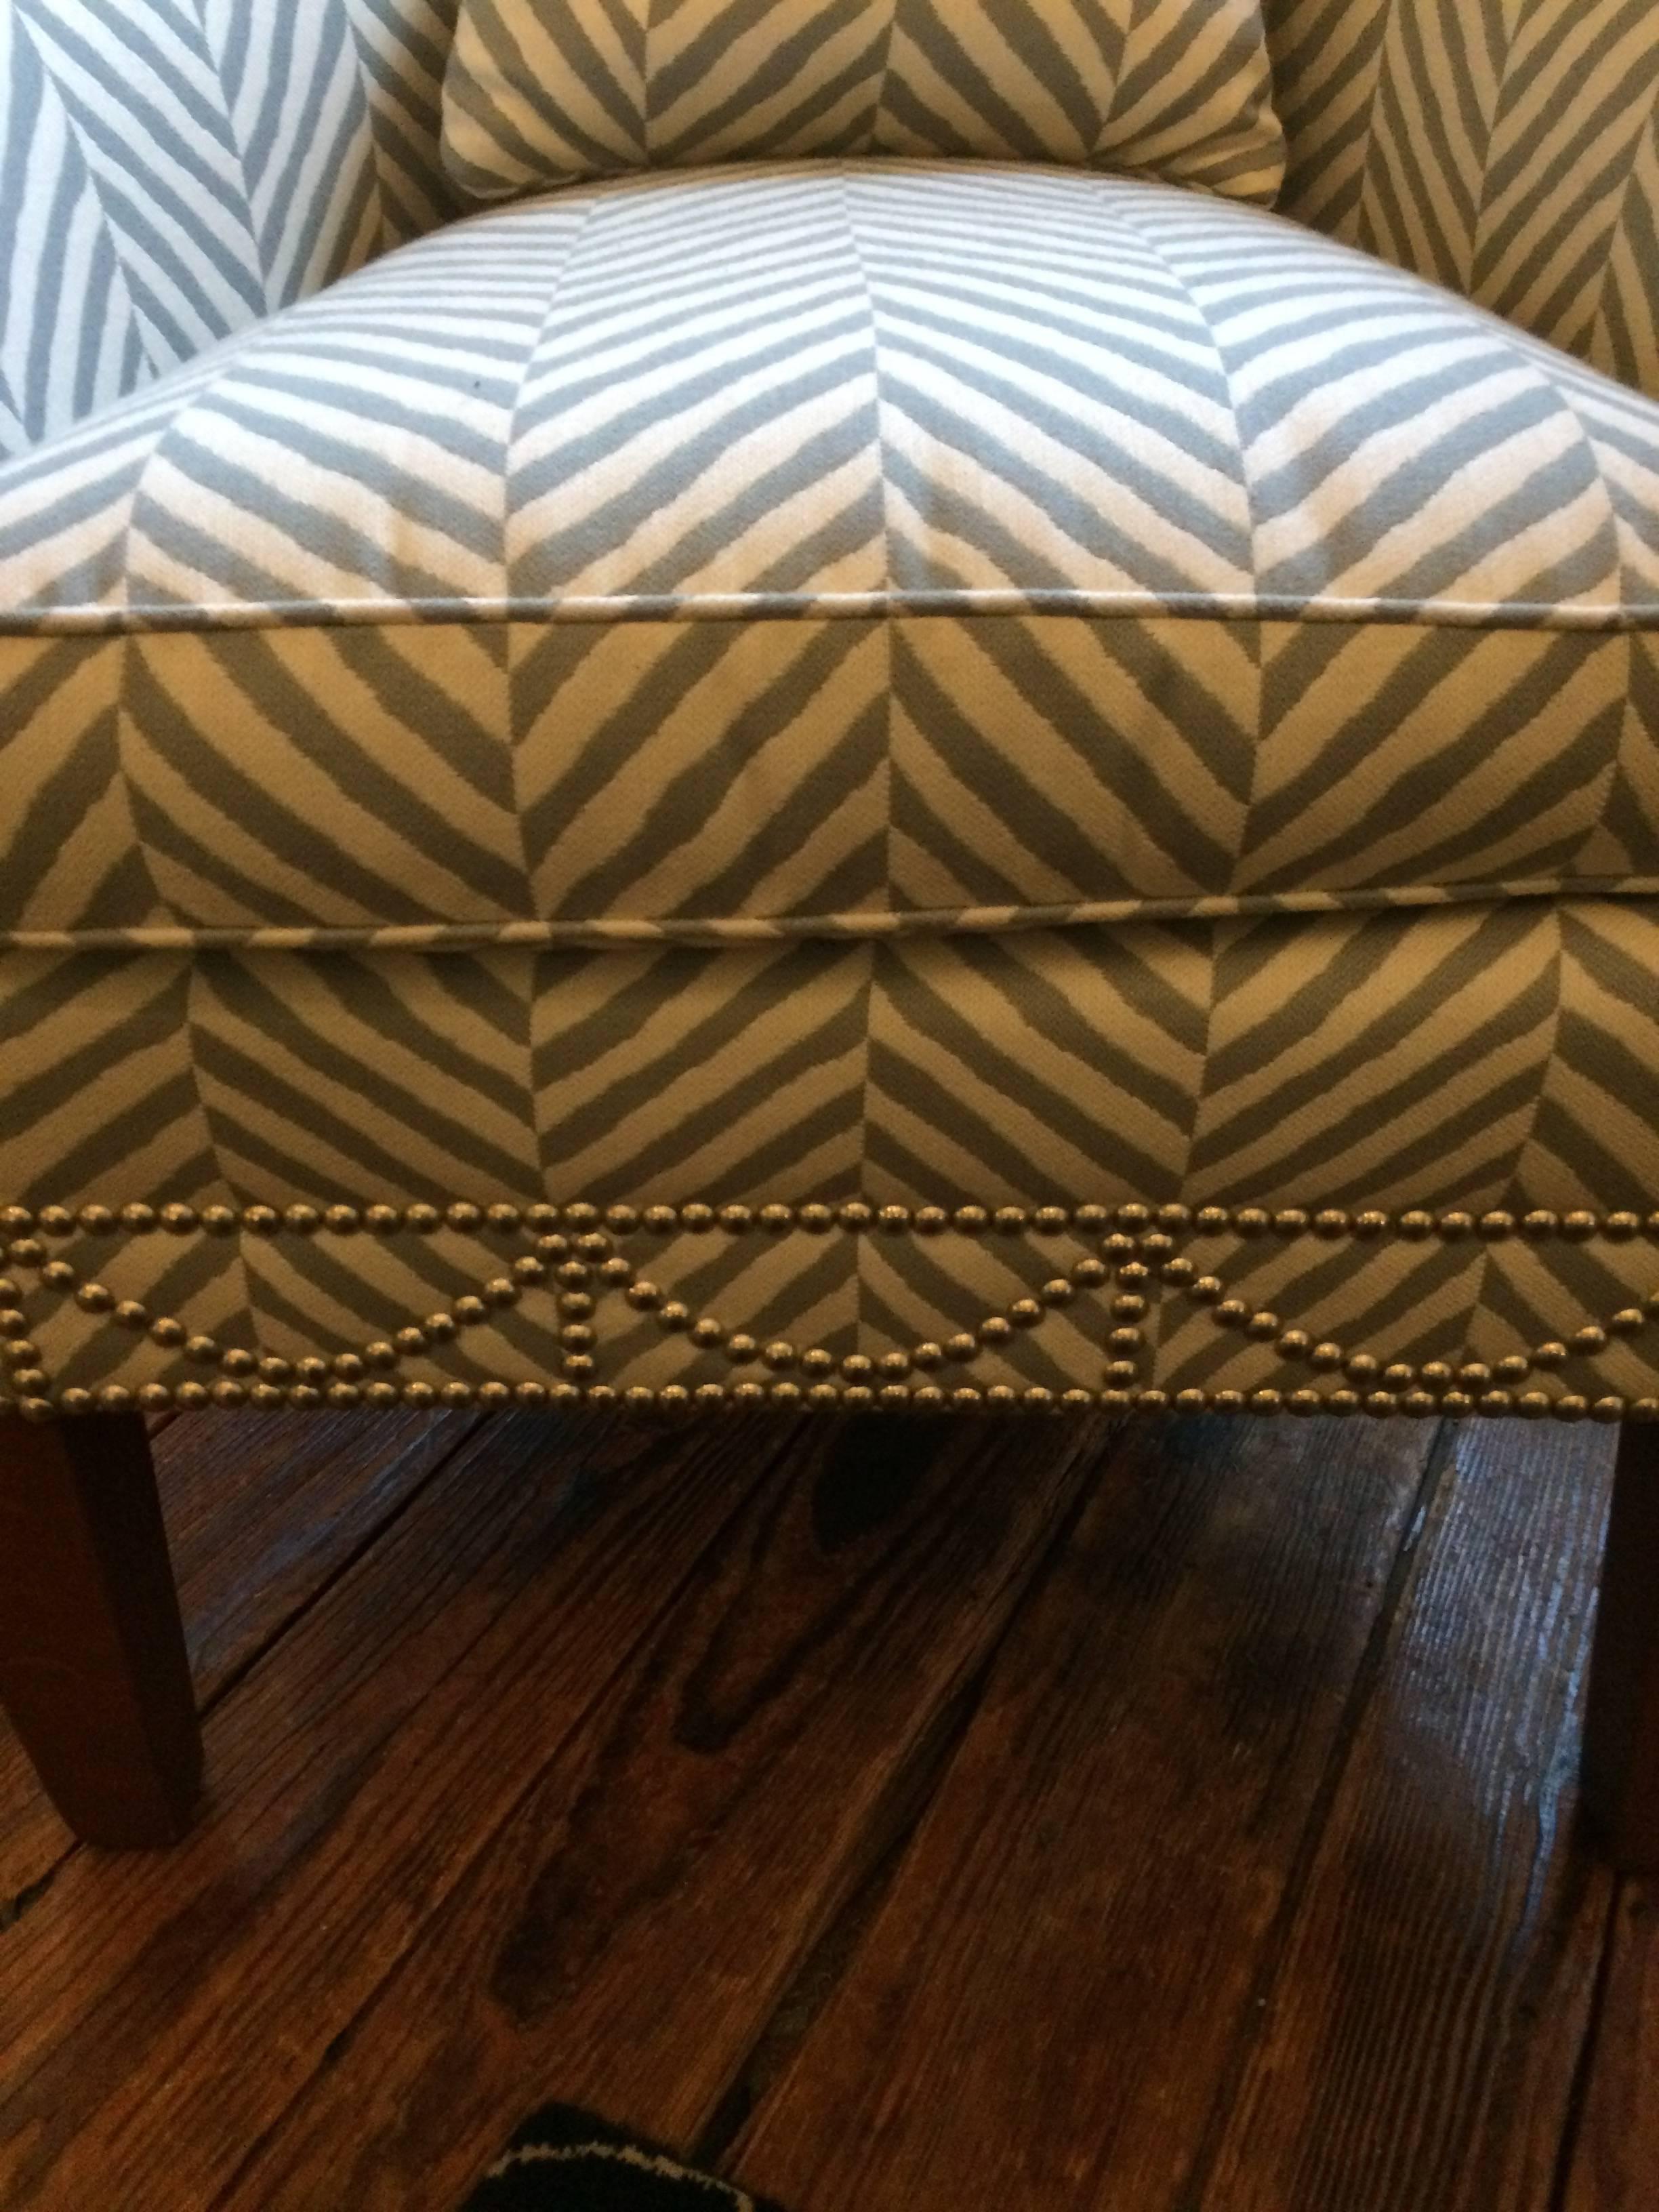 Stunning Grey and White Chevron Upholstered Club Chair im Zustand „Hervorragend“ in Hopewell, NJ